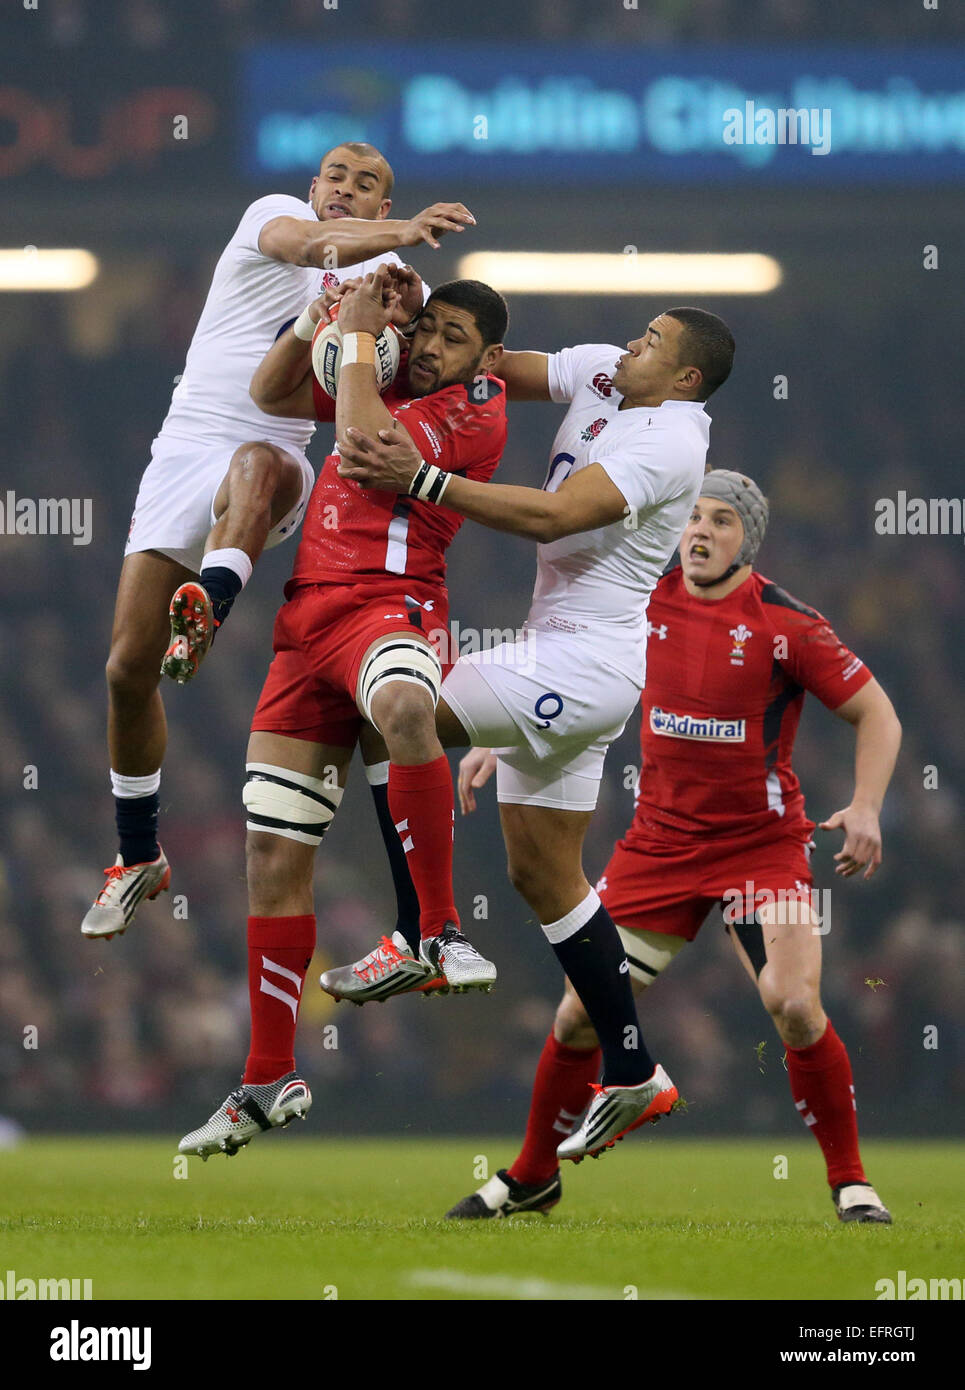 Cardiff, UK. 6th Feb, 2015. Taulupe Faletau of Wales wins the ball from Jonathan Joseph and Luther Burrell of England- RBS 6Nations 2015 - Wales vs England - Millennium Stadium - Cardiff - Wales - 6th February 2015 © csm/Alamy Live News Stock Photo